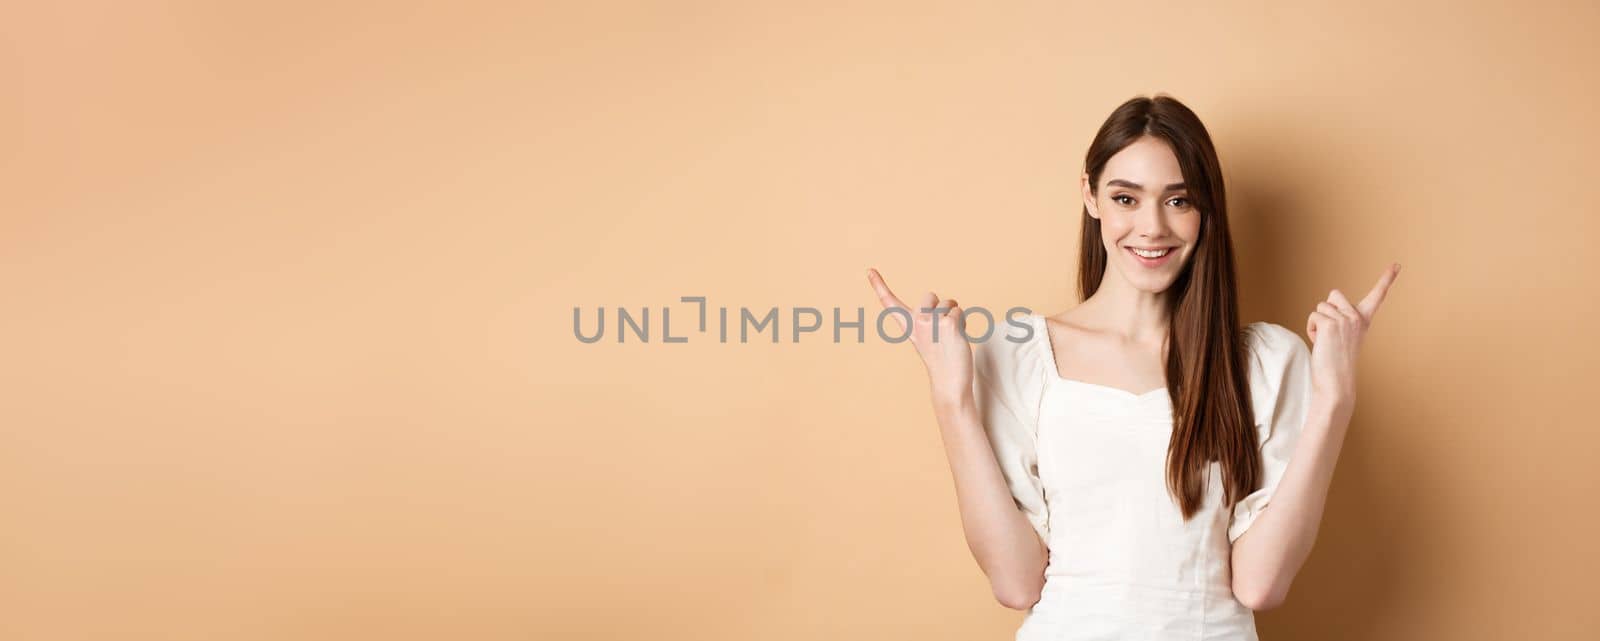 Beautiful young woman in dress pointing fingers sideways, show two ways, giving choice and smiling, standing on beige background.